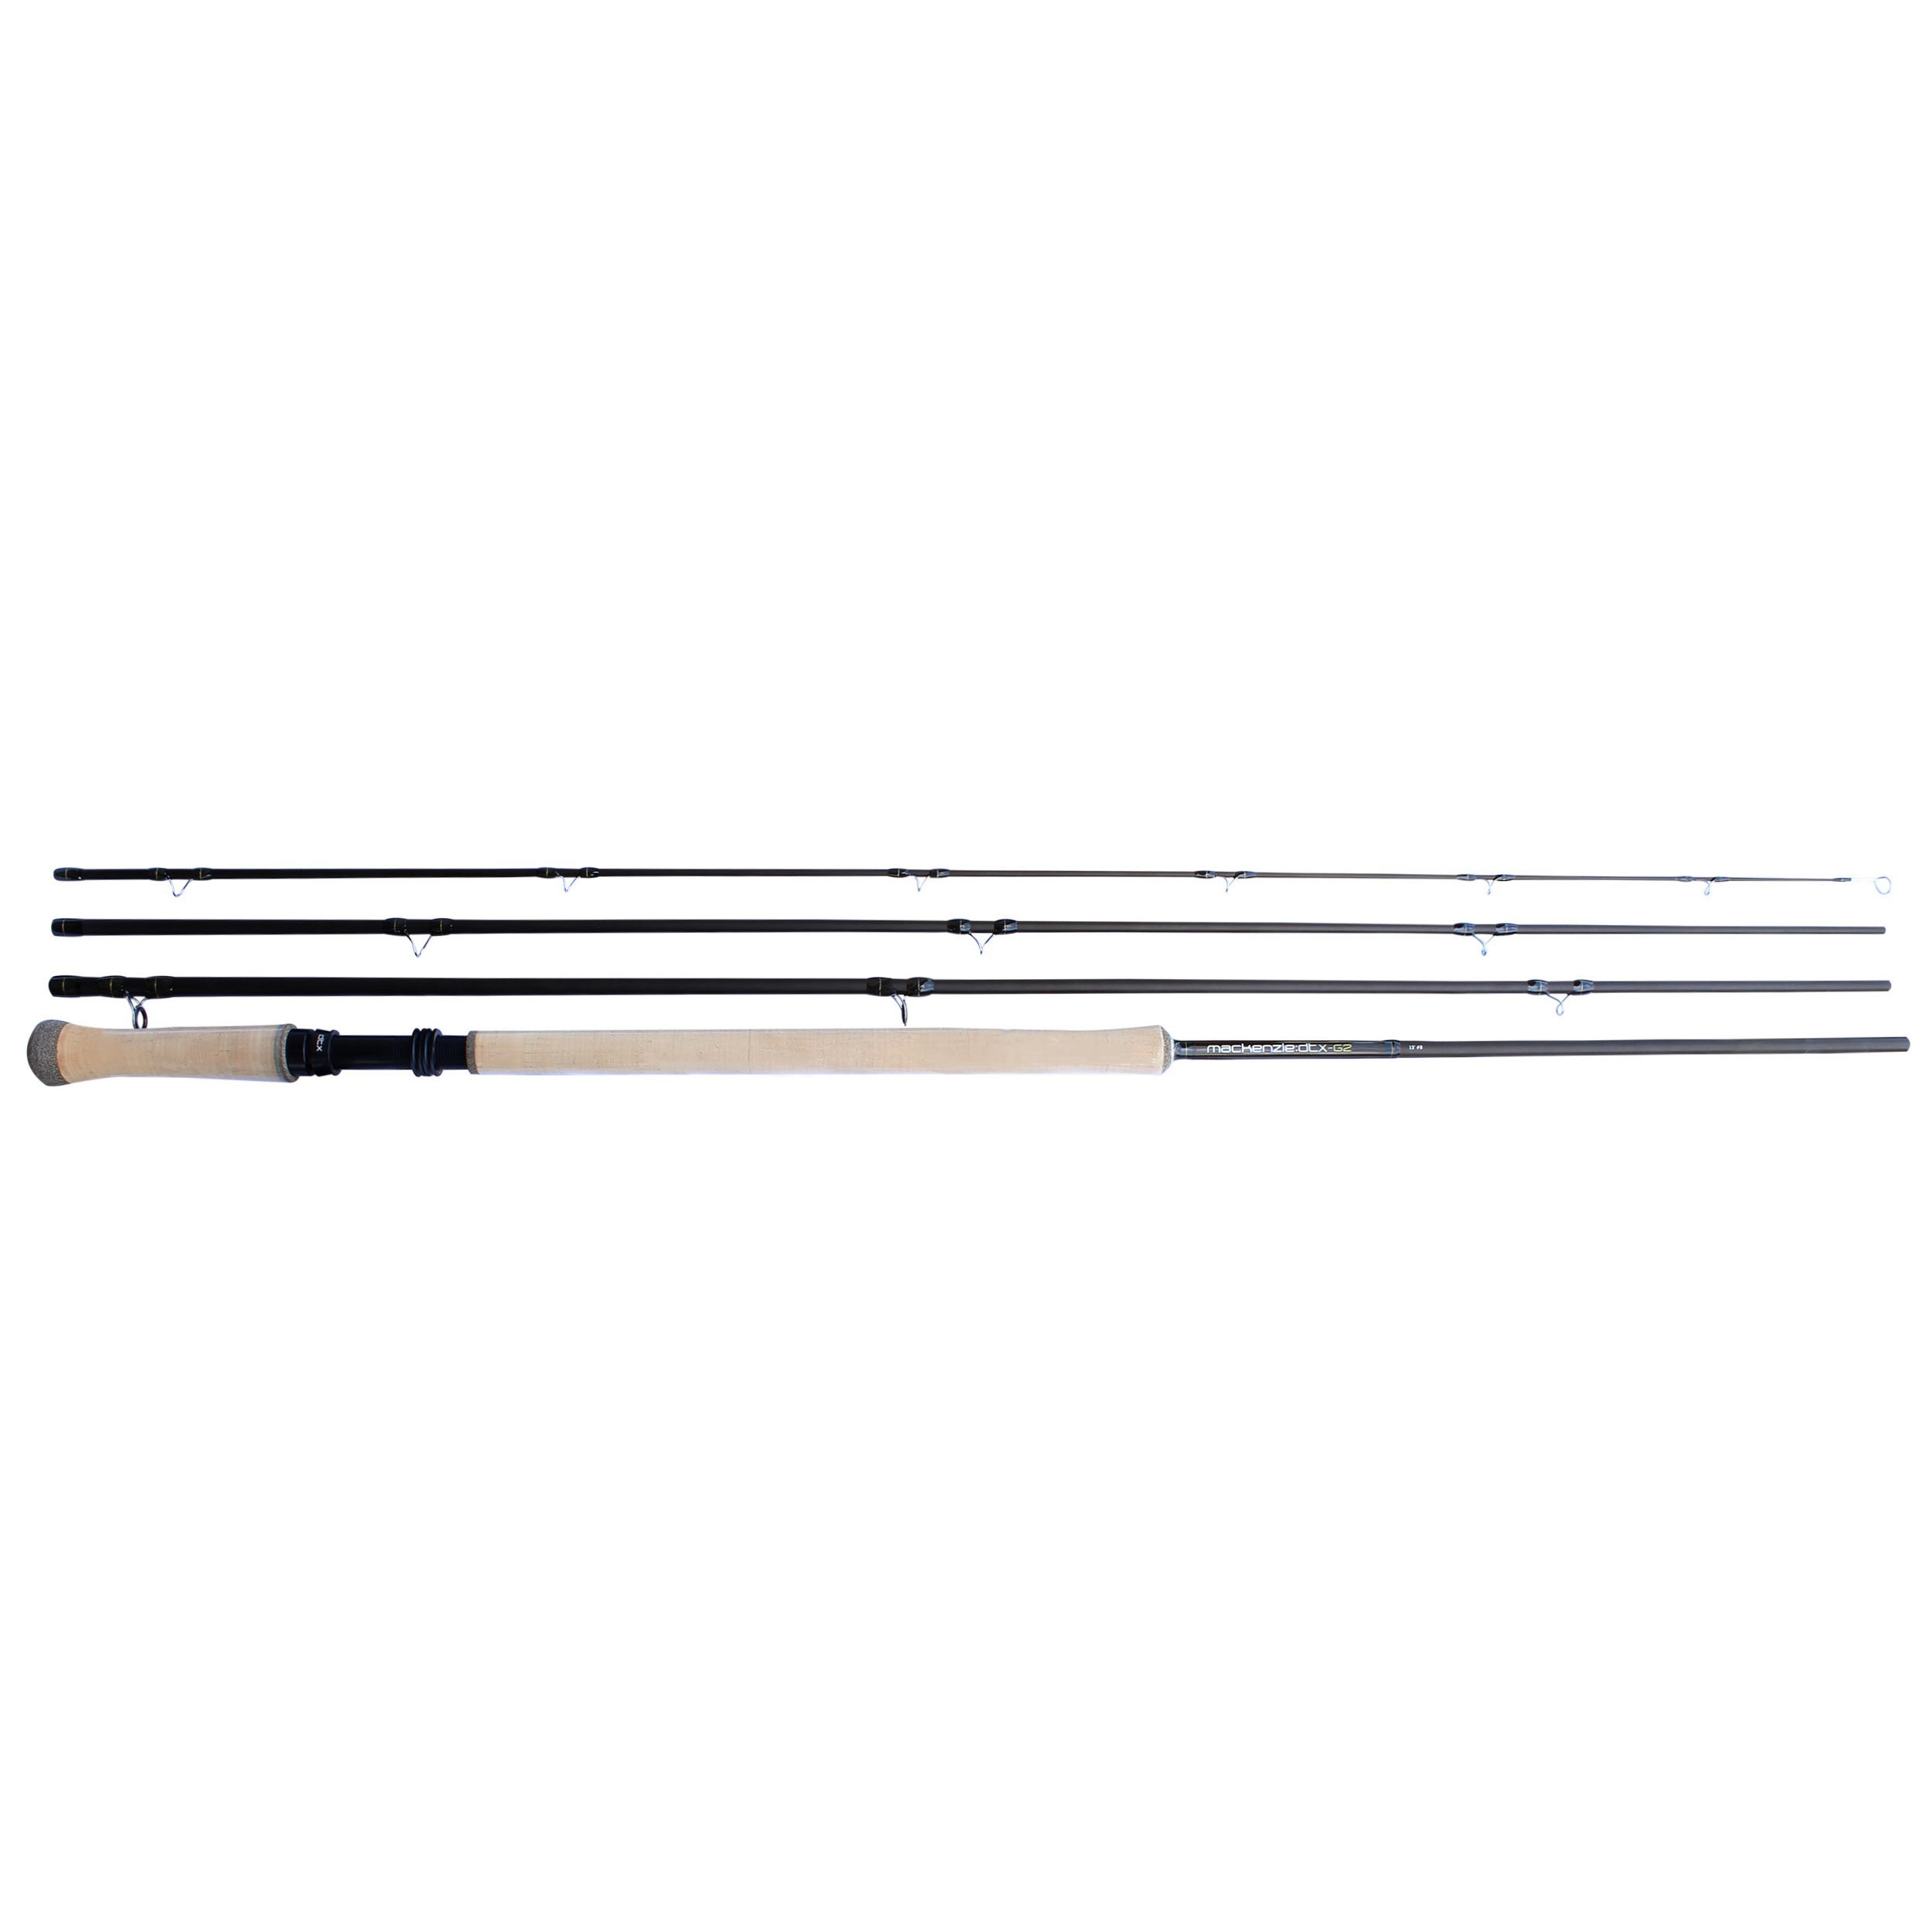 Mackenzie DTX G2 Spey Rod - Double Handed Salmon Fly Fishing Rods